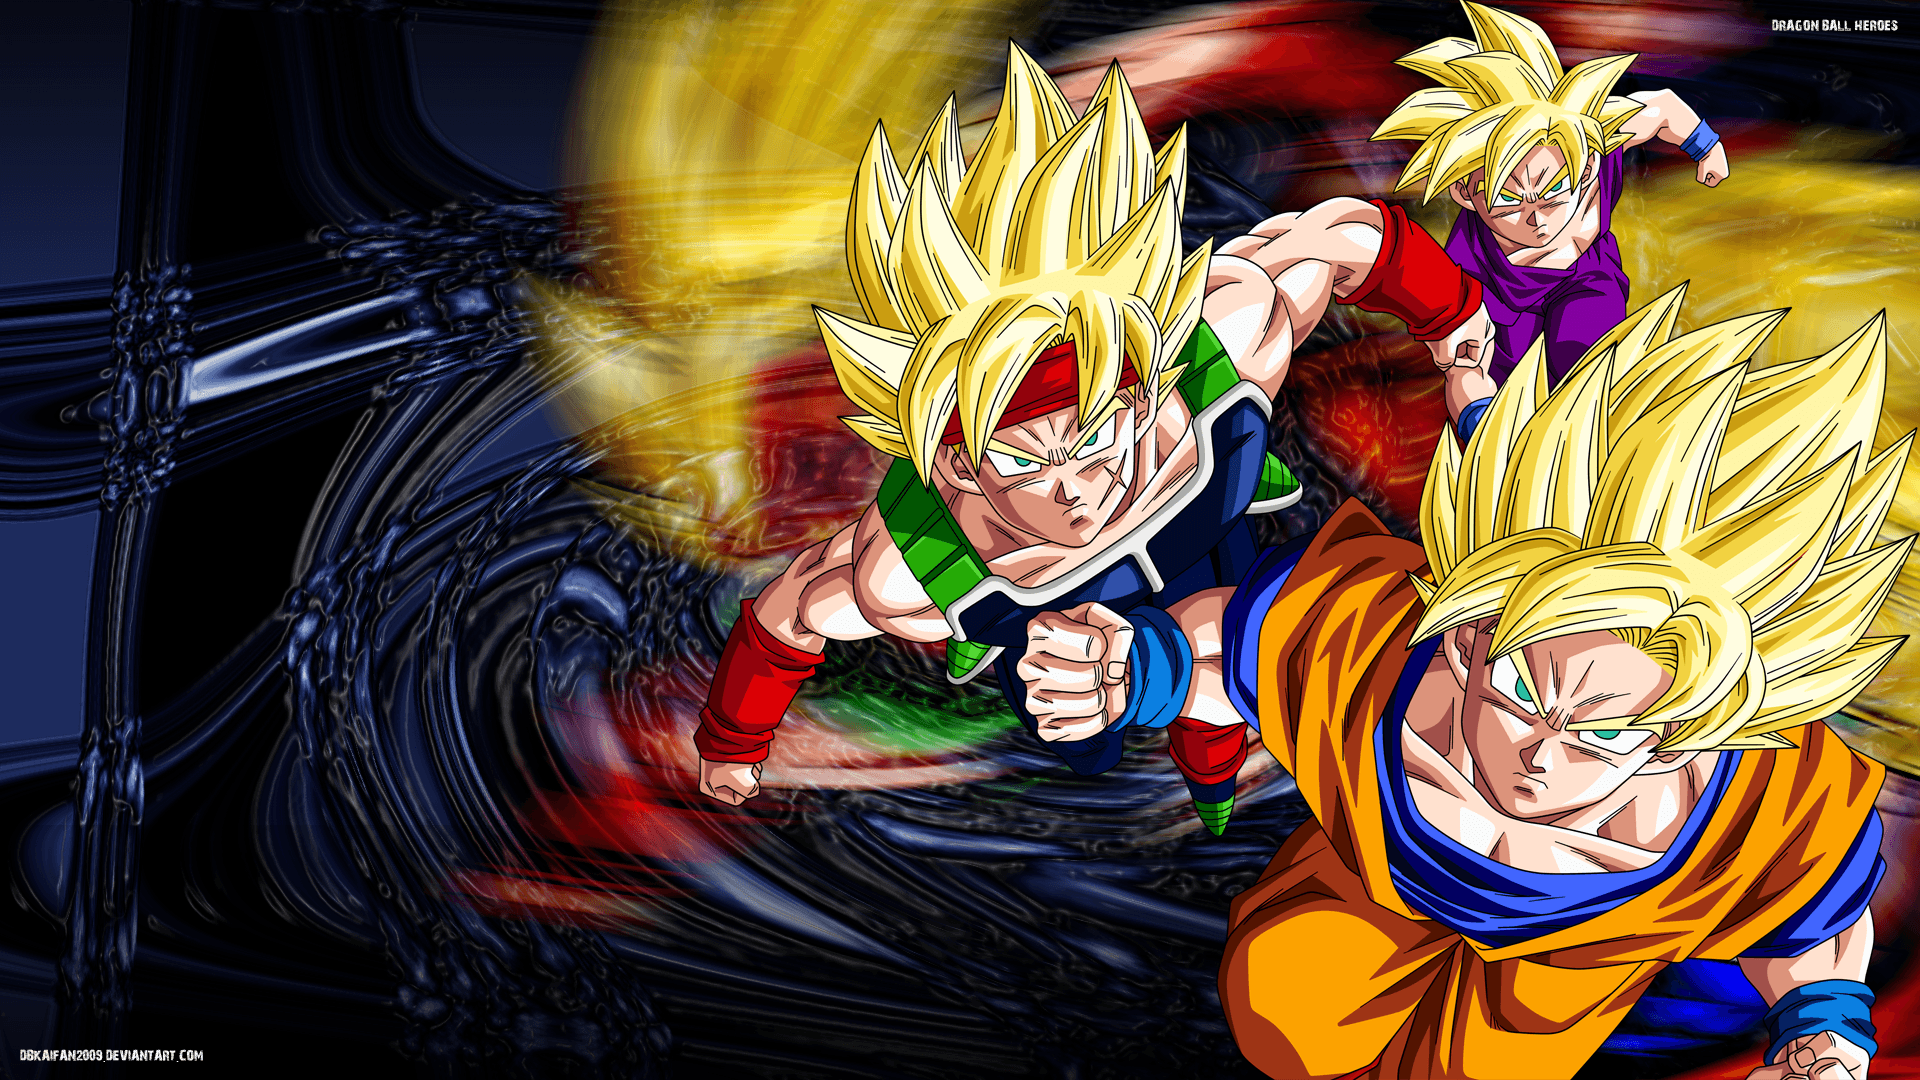 🔥Dragon Ball Gt - Android, iPhone, Desktop HD Backgrounds